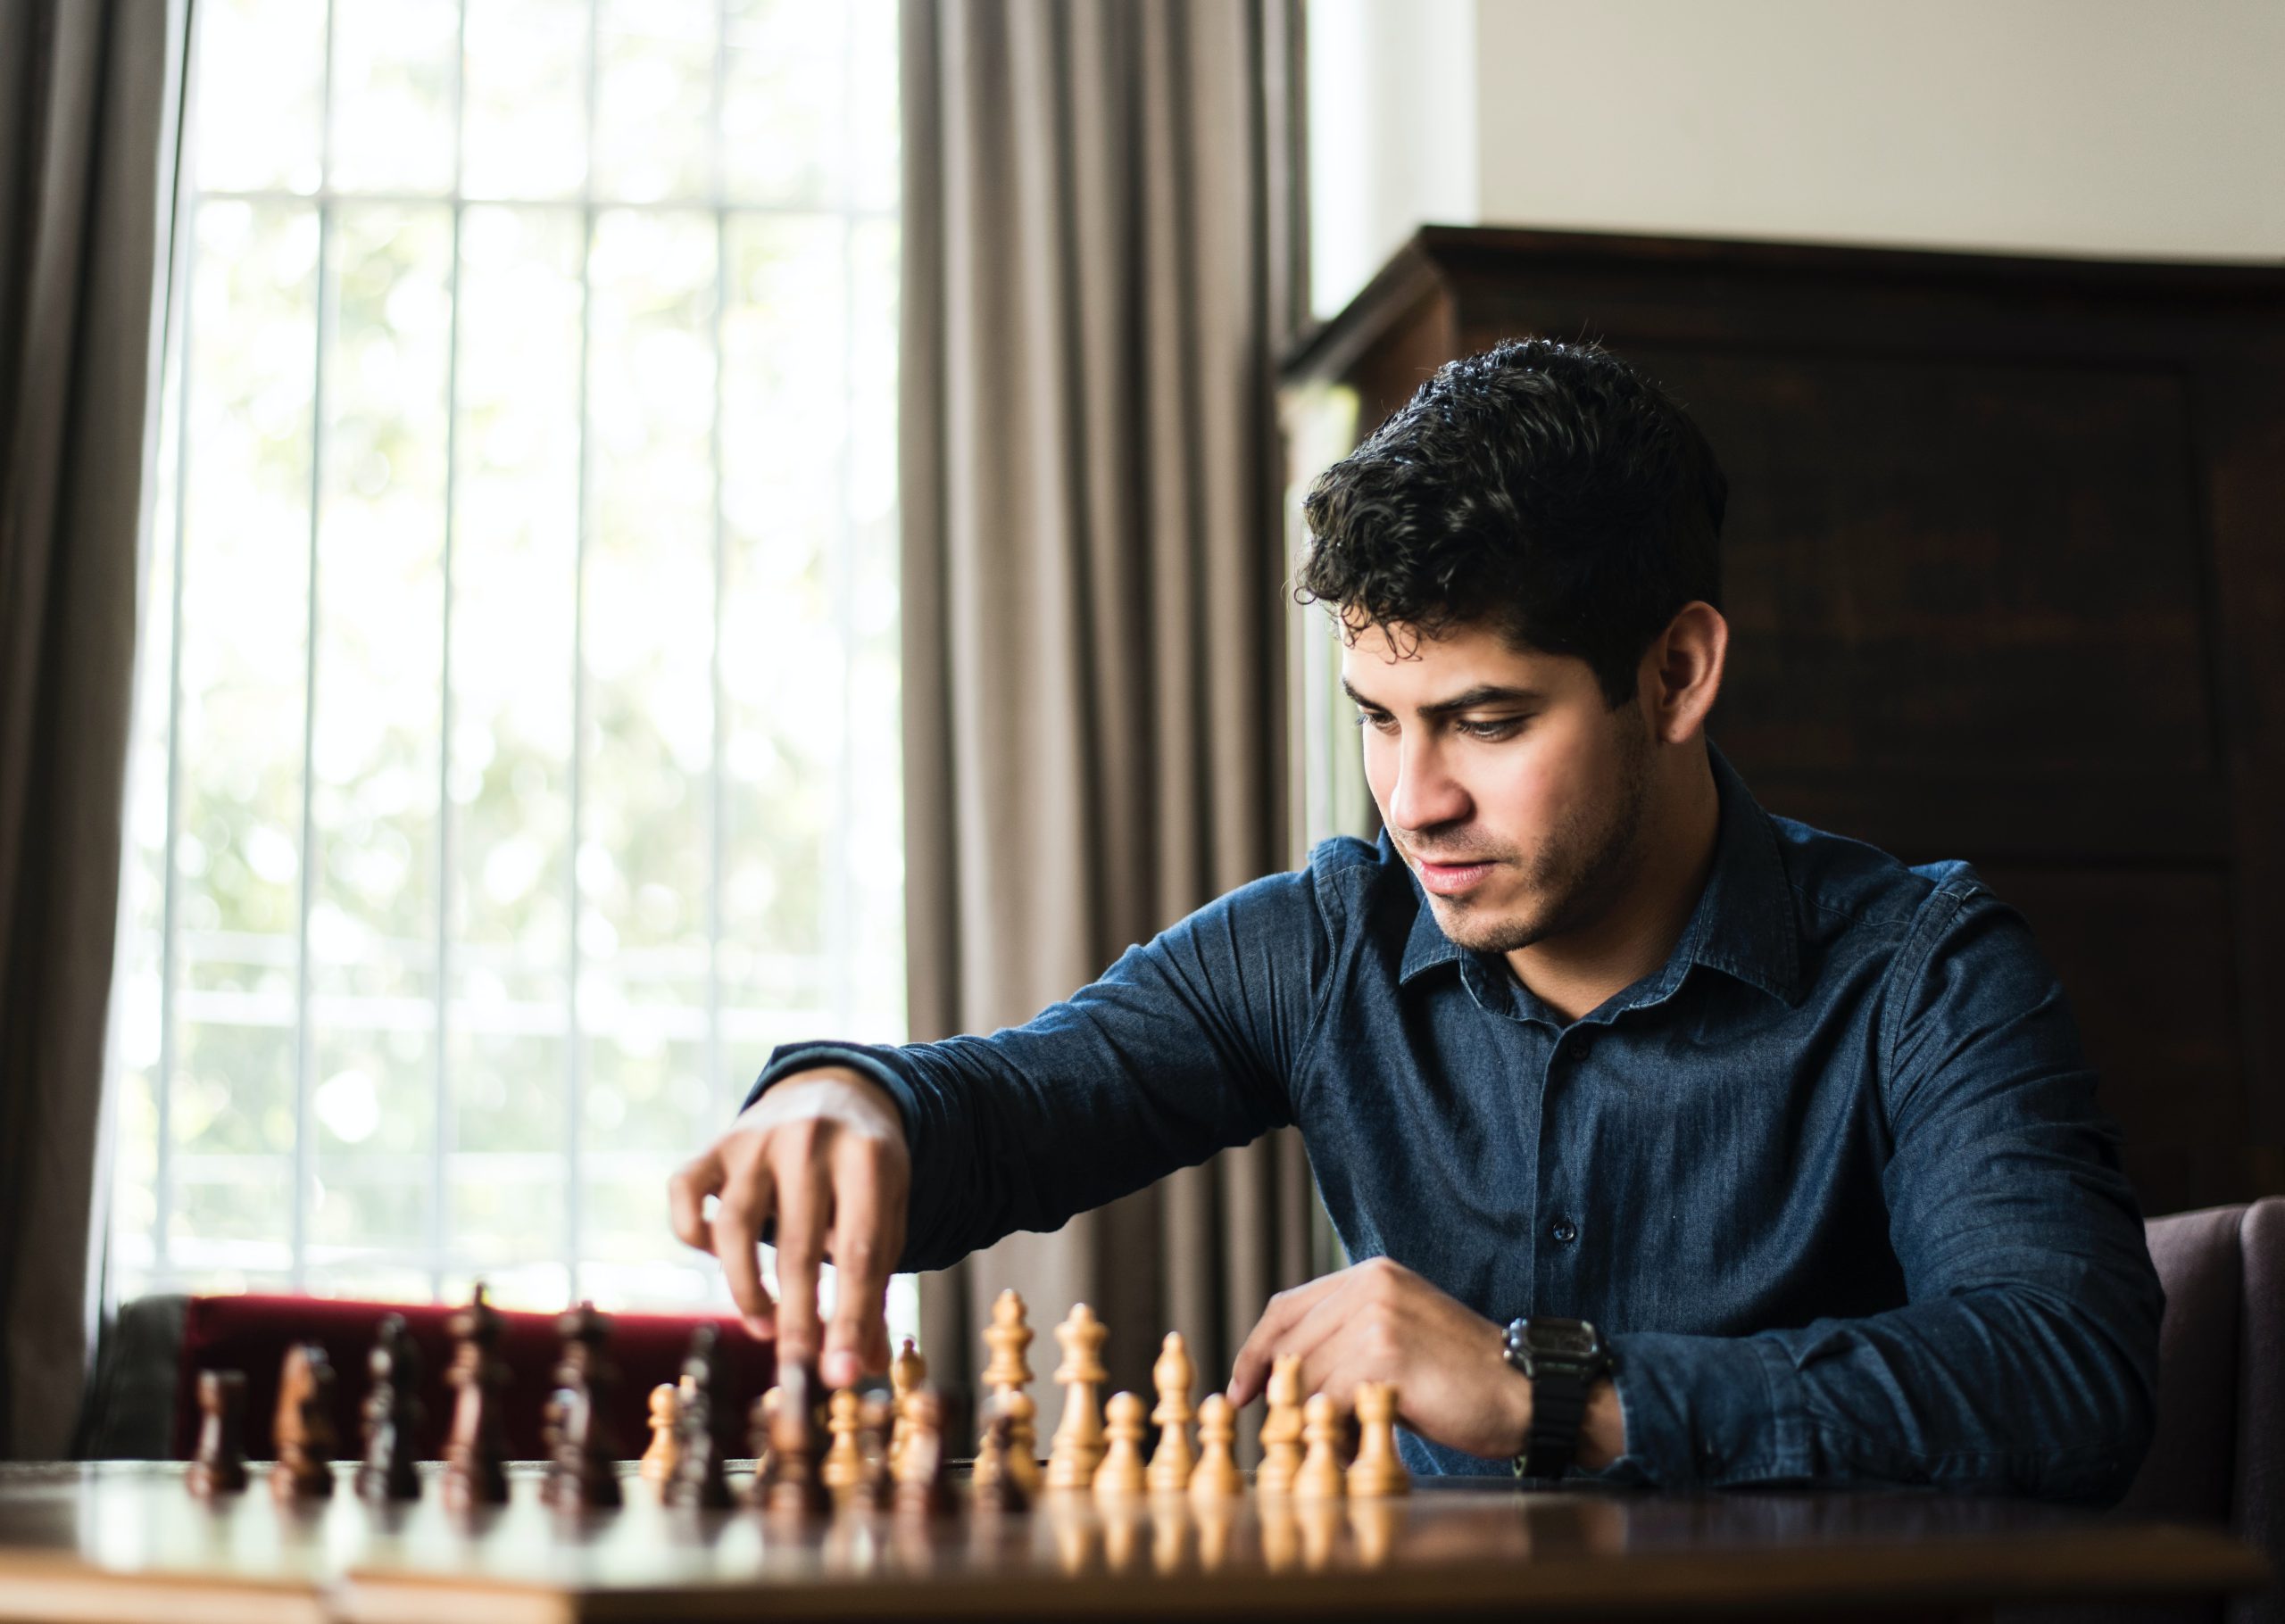 20 chess quotes from professionals to increase your motivation -  Woochess-Let's chess